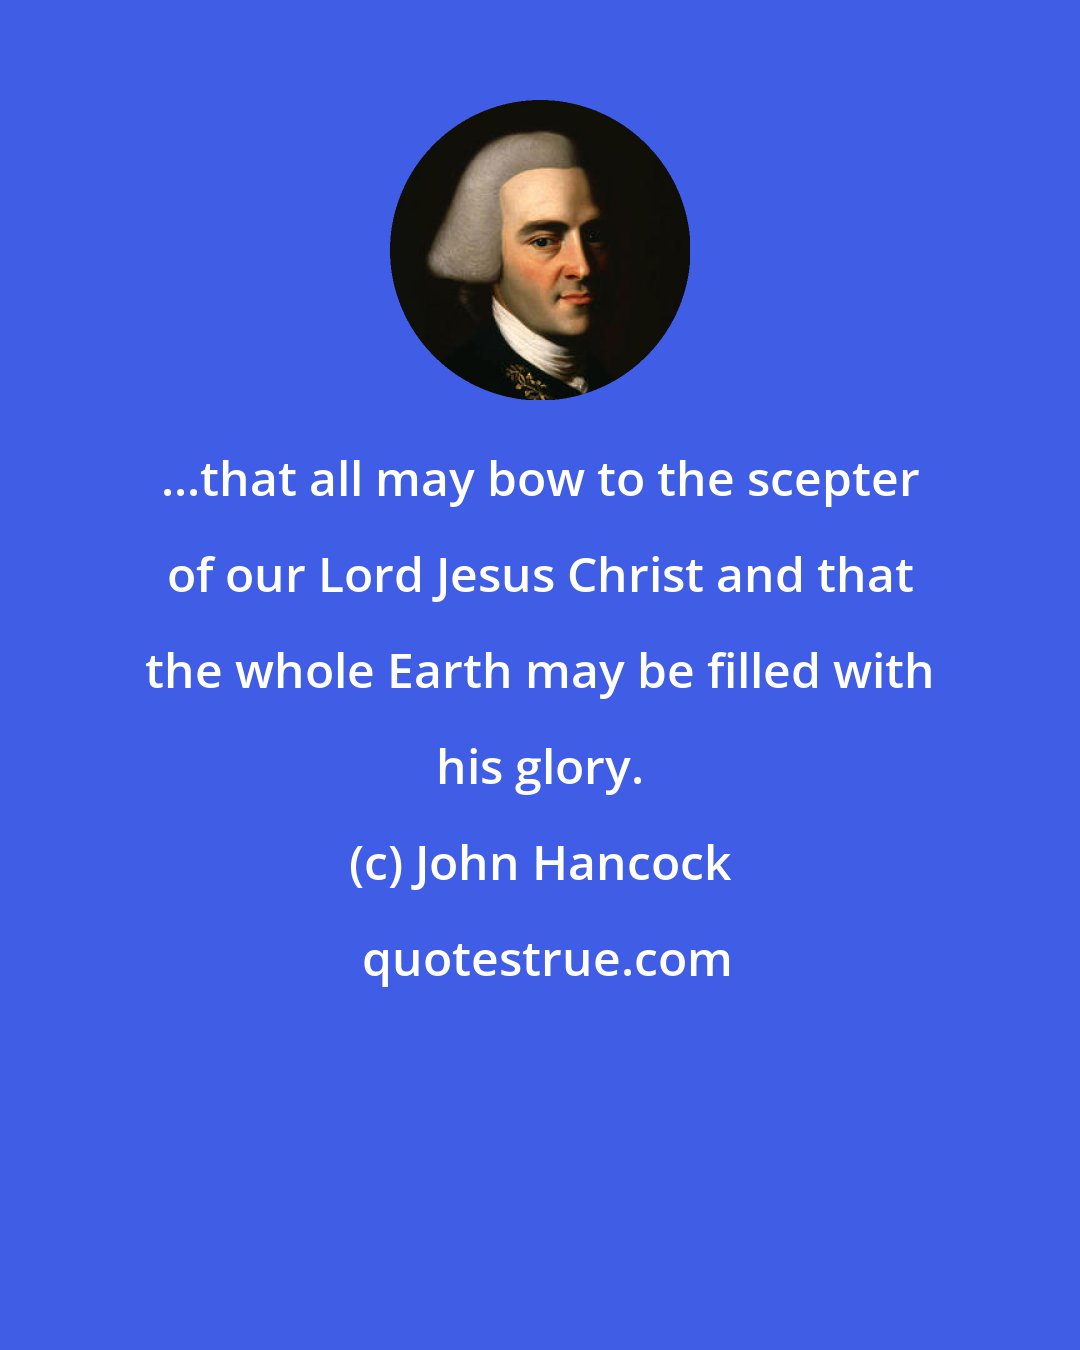 John Hancock: ...that all may bow to the scepter of our Lord Jesus Christ and that the whole Earth may be filled with his glory.